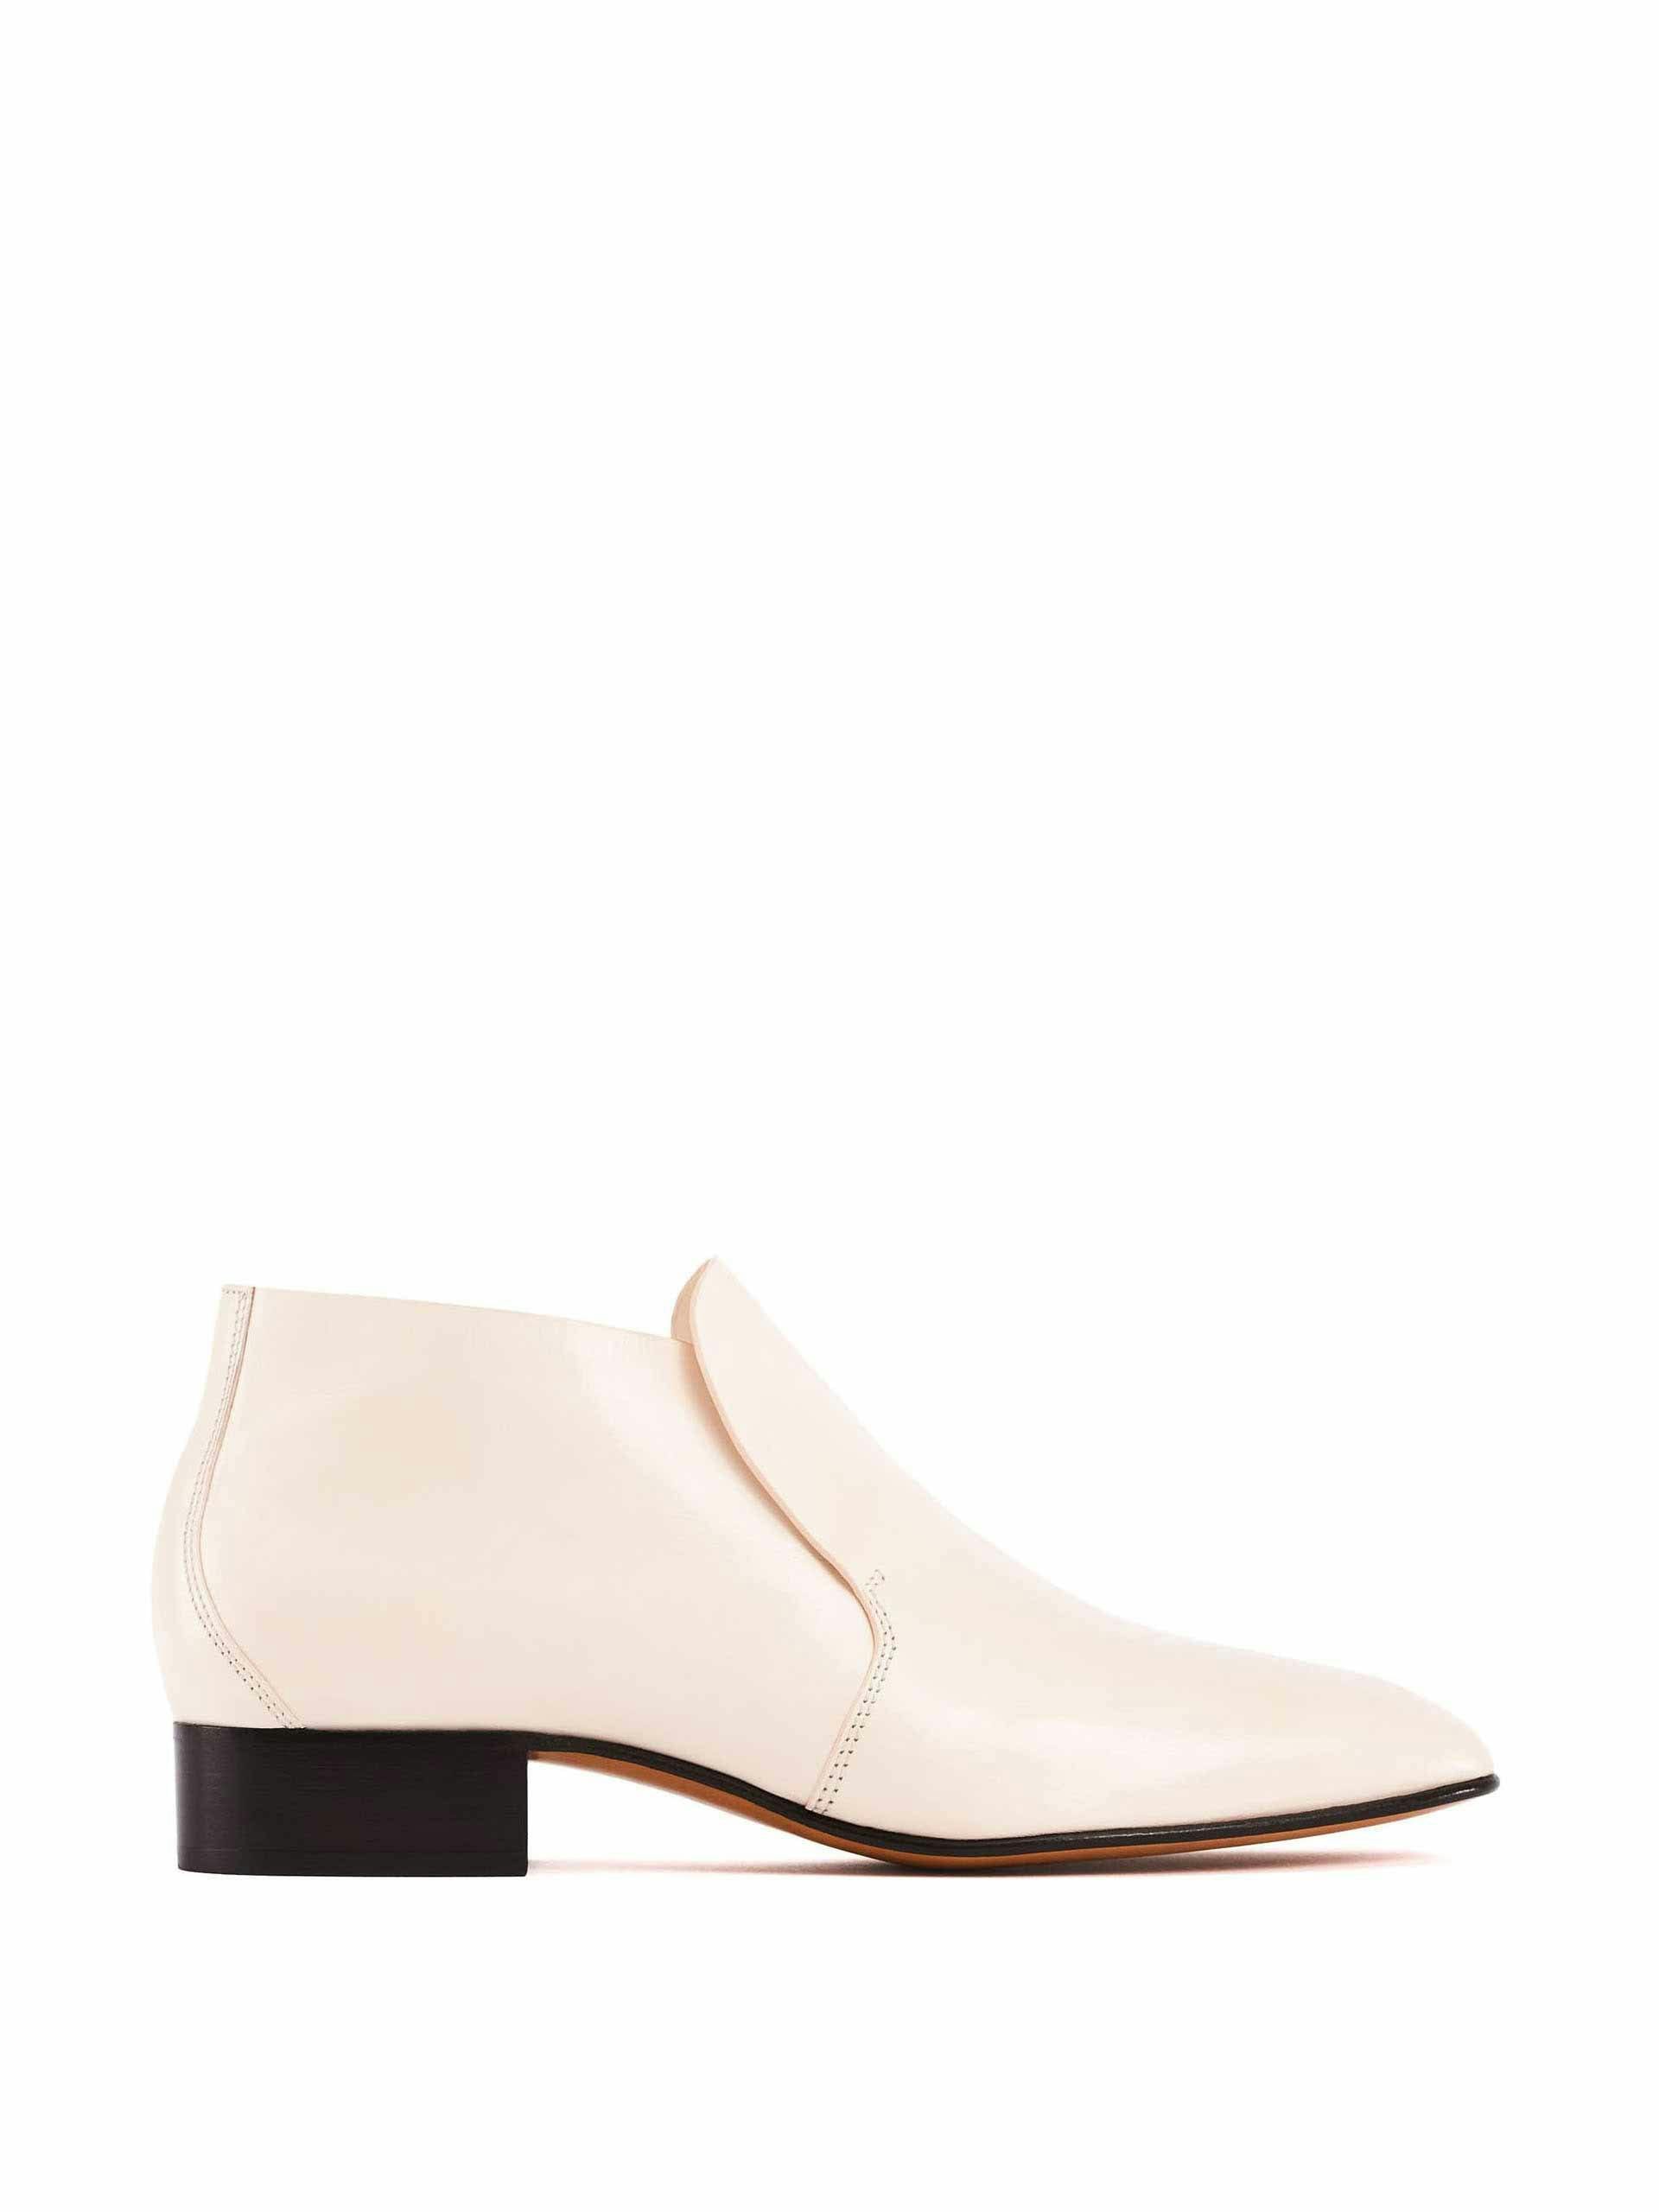 White calfskin leather shoes